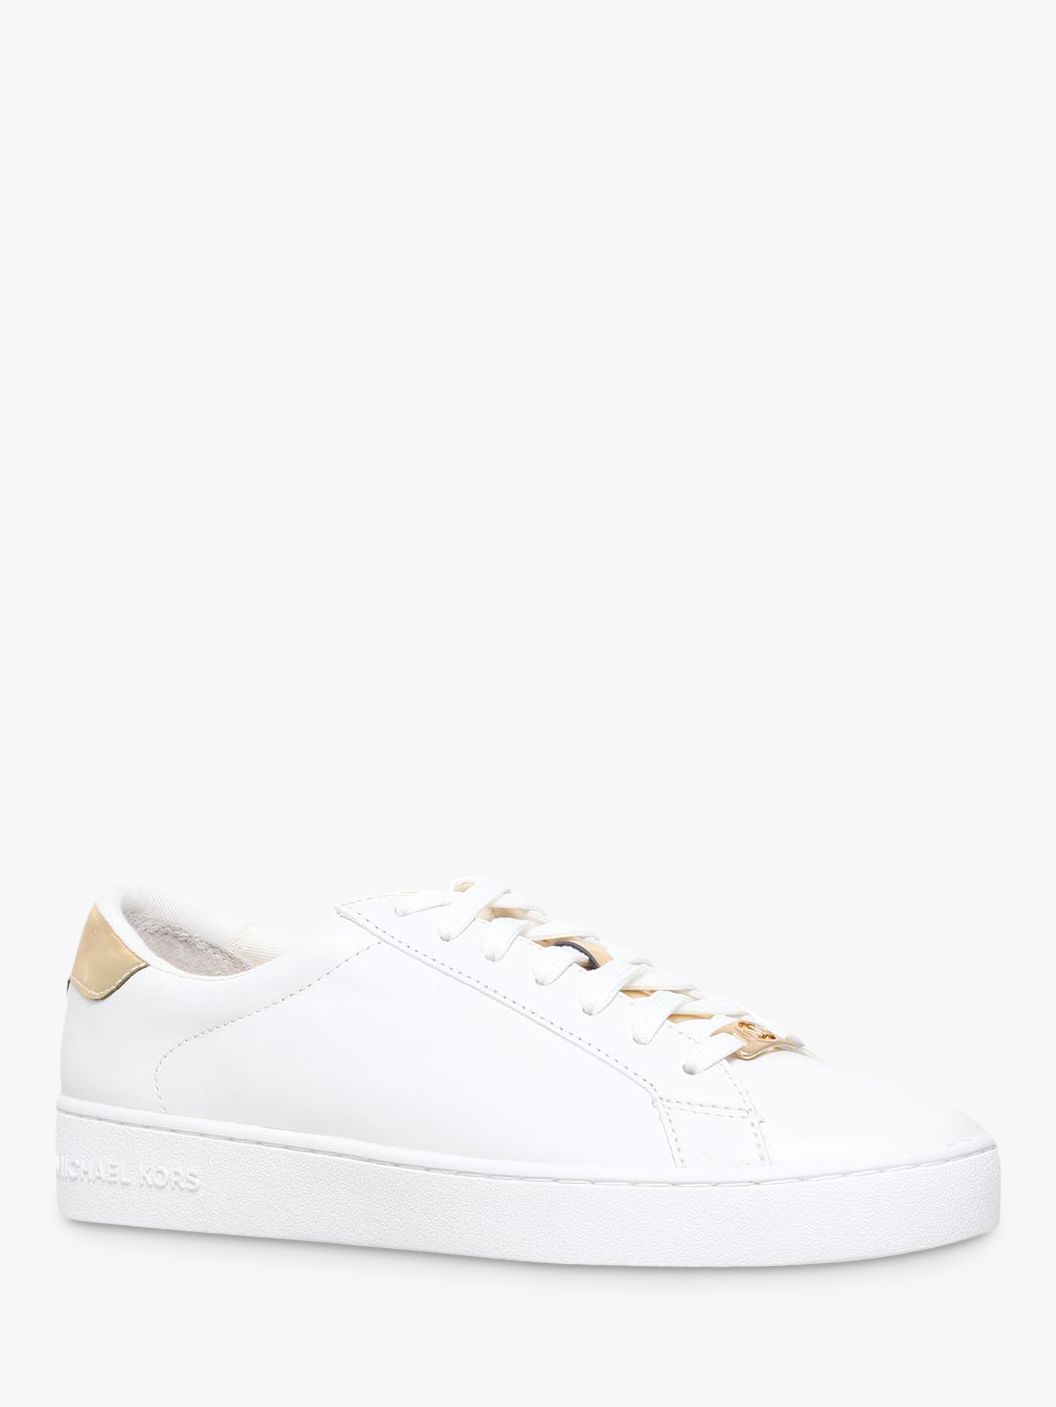 michael kors white and gold shoes